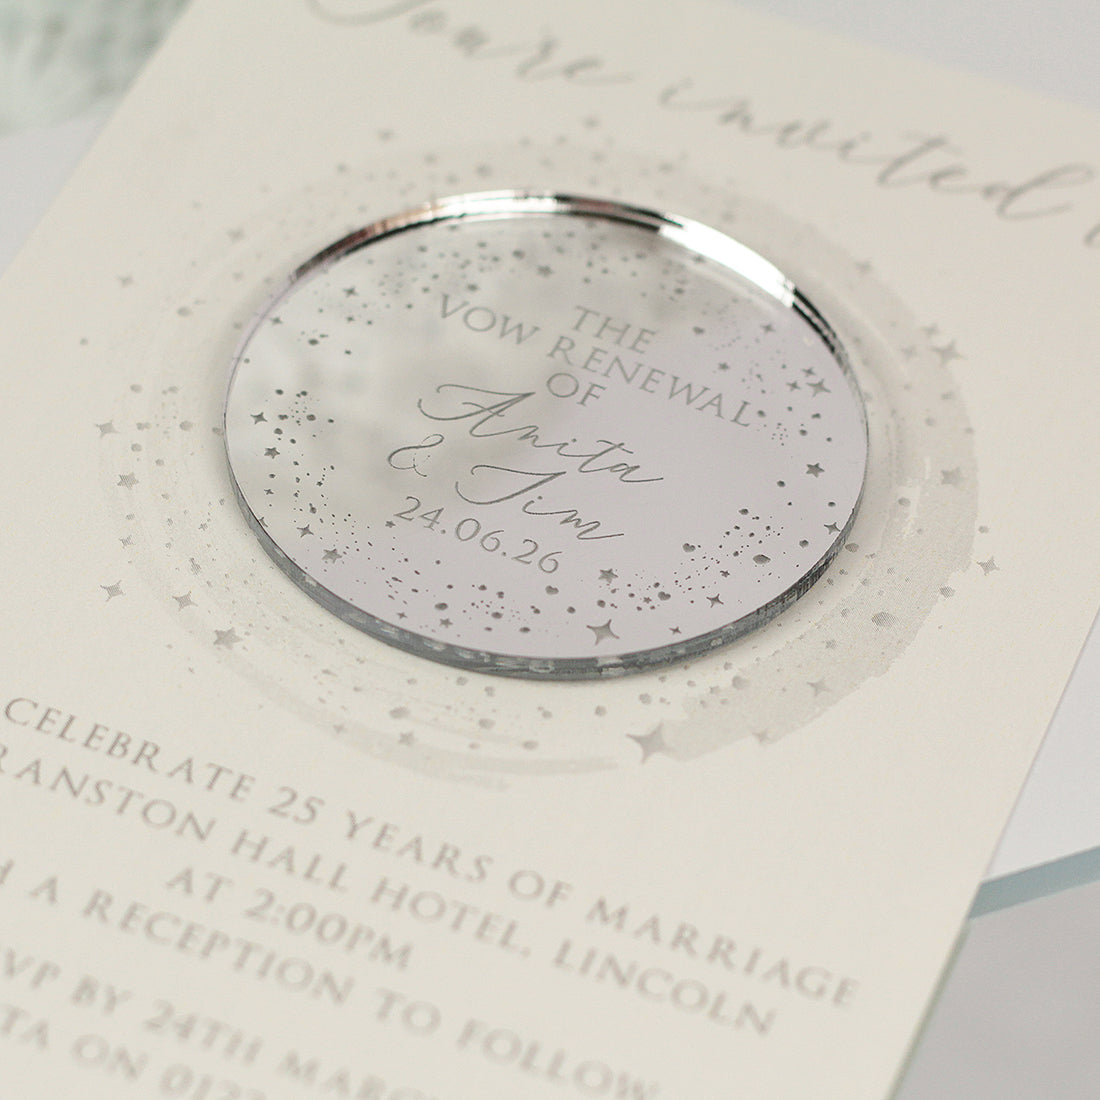 Sparkly Circle Vow Renewal Invitation Magnet